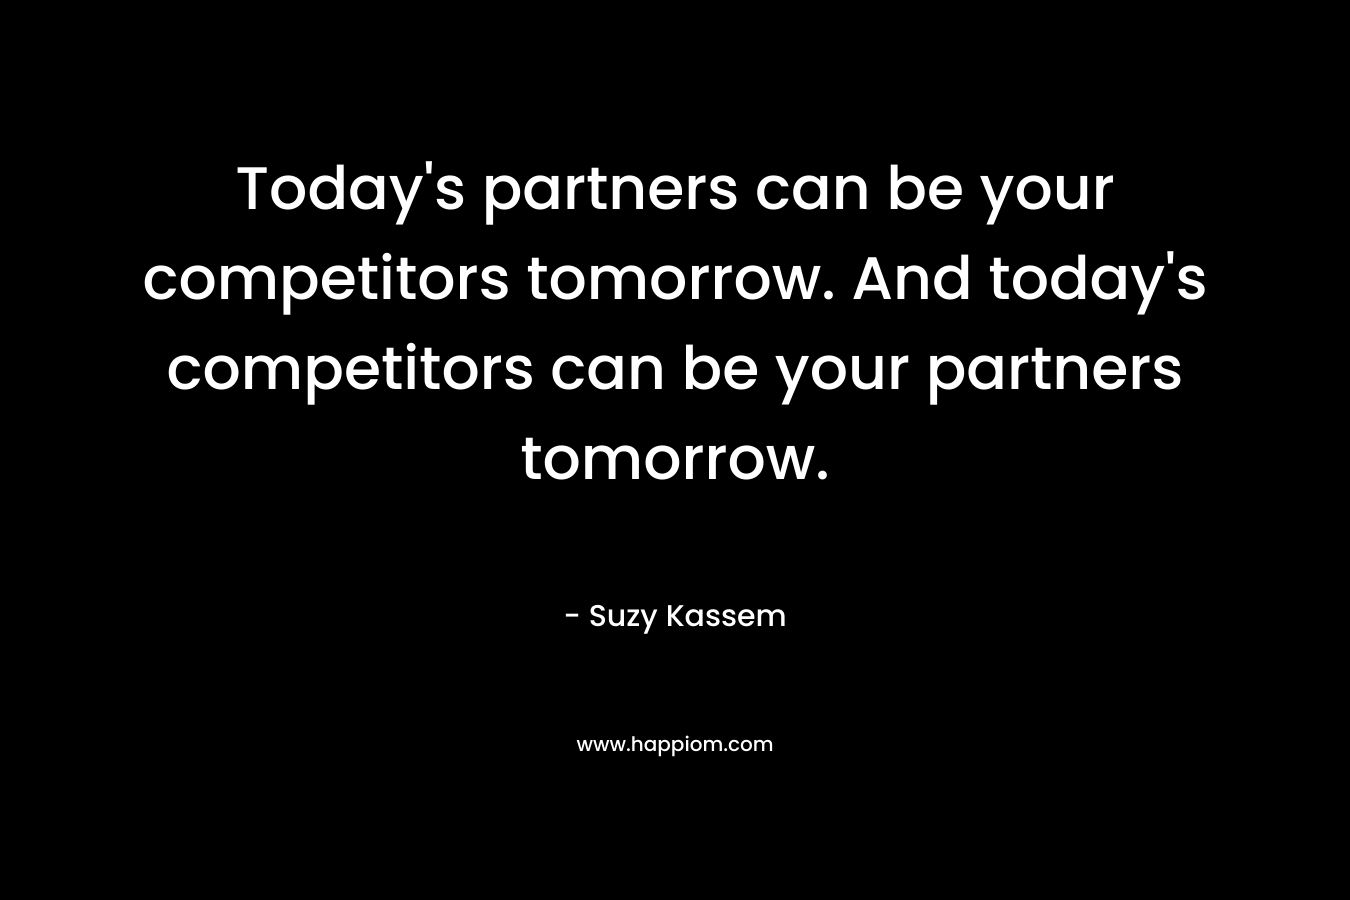 Today's partners can be your competitors tomorrow. And today's competitors can be your partners tomorrow.